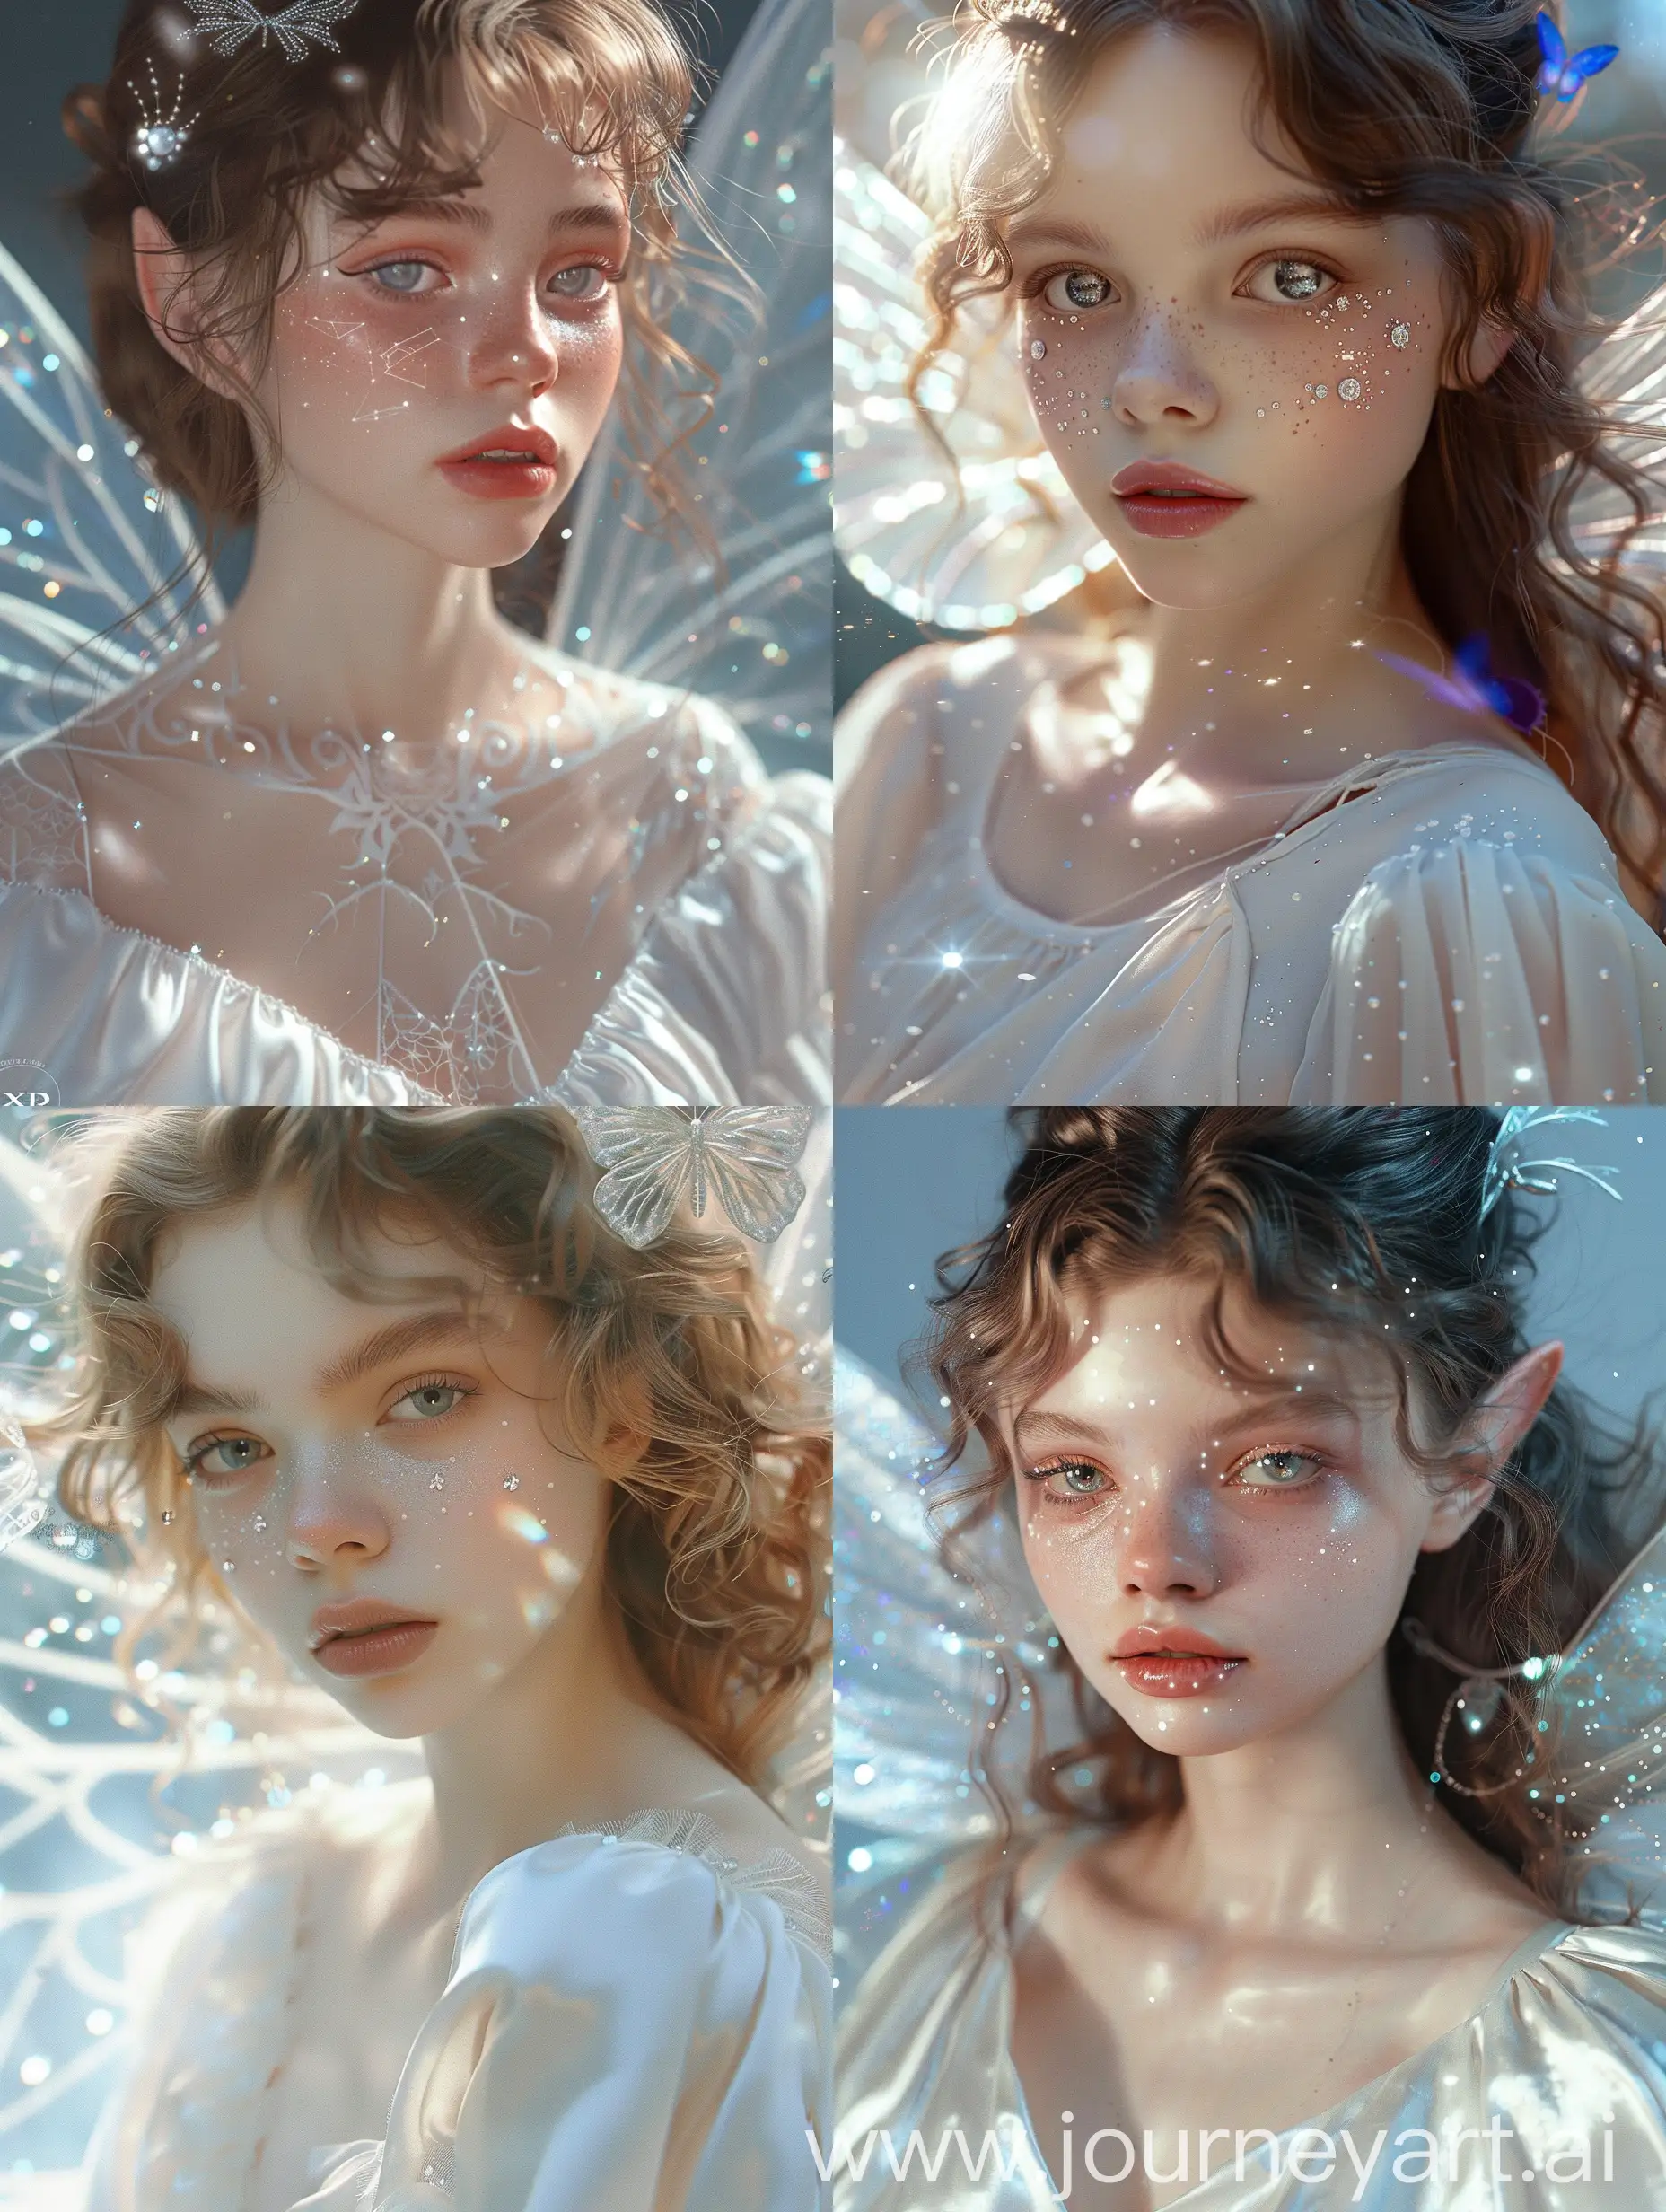 cinematic still, close-up, photo of a fantastic, highly detailed representation of a beautiful 22-year-old girl with an ethereal quality. Fantastic Magic butterflies, a white silk nightgown, full body,  beautiful body, delicate curvy features, is a fairy with silky, striking hair and fair skin embellished with delicate magical details that resemble constellations or enchanted worlds. Their eyes are large and expressive, conveying a sense of curiosity or introspection. Notably, she has beautiful fairy wings including sparkling diamonds. The delicate textures of her clothes and accessories, along with her serene expression, give her a look of innocence that appears both serene and complex, aw0k magnstylesony fe 12-24mm f/2.8 gm, close up, 32k uhd, incredible quality , wallpaper, analog film grain, color APEX, more detail XL,Fairy, cinematic moviemaker style